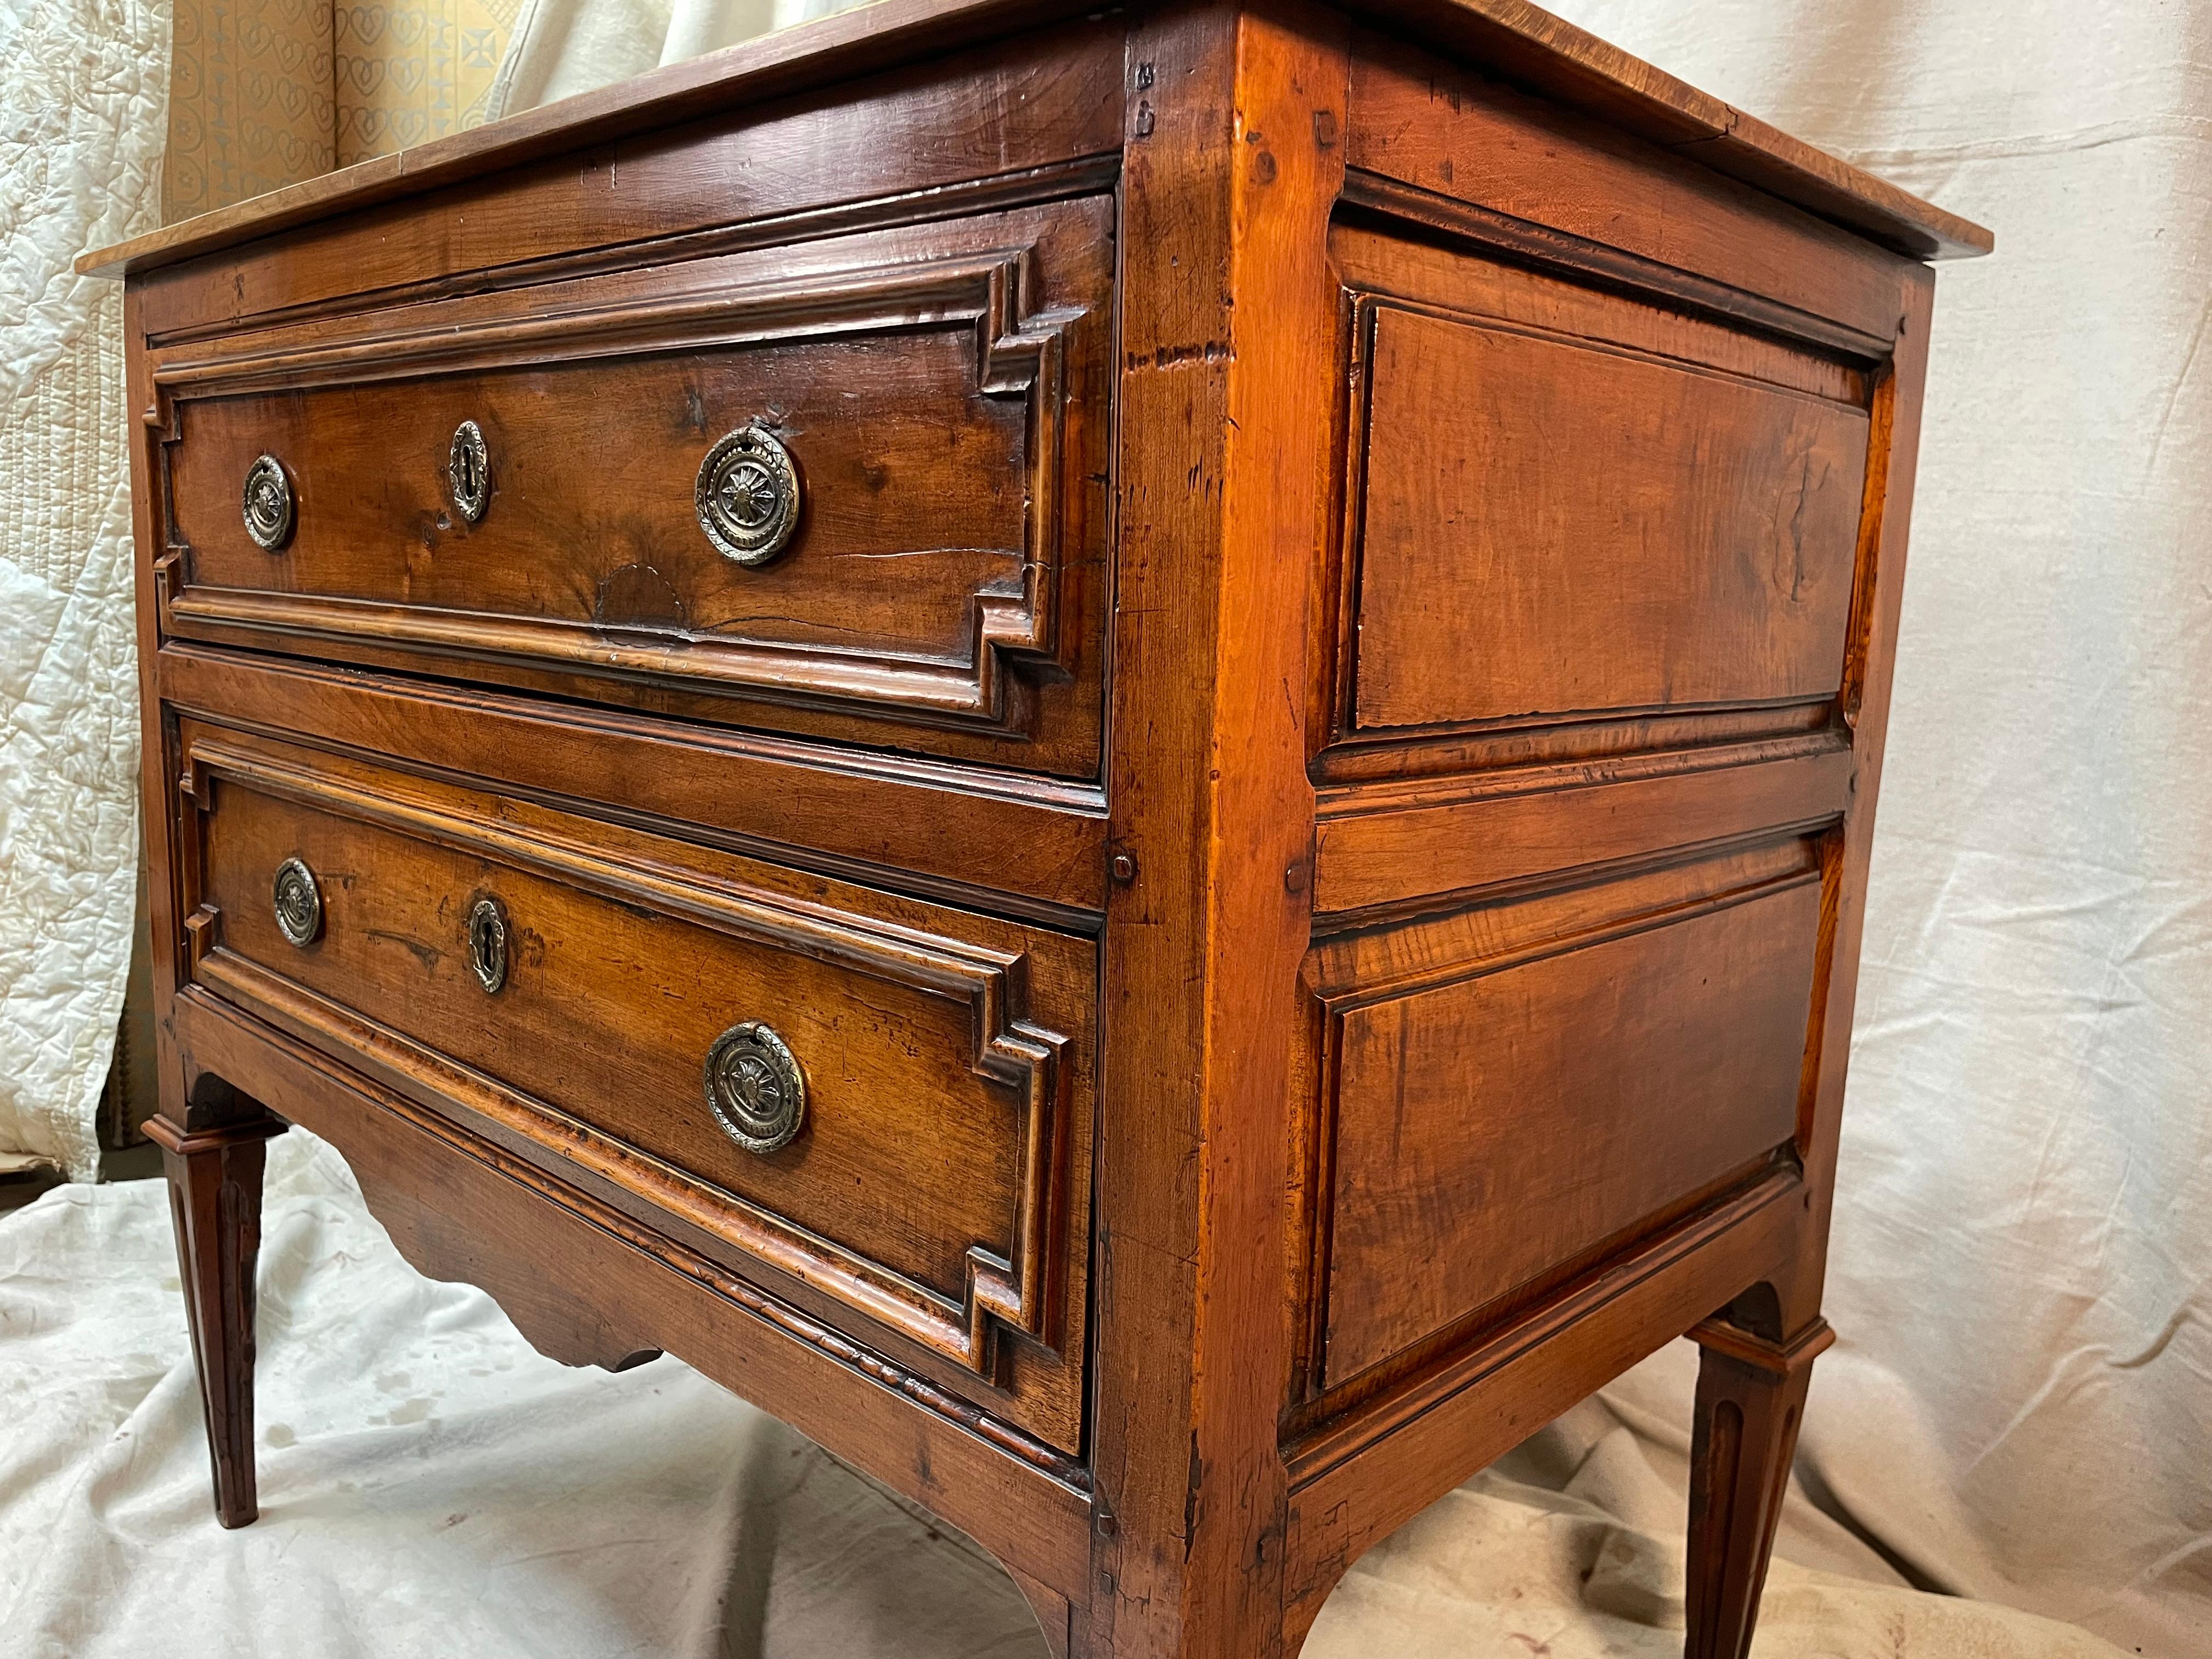 This beautiful French Neoclassical chest of drawers with spectacular dovetailed engravings has seen lifetimes pass it by. Made in a time when furniture was created to be seen as a luxurious art form; with a delicate touch, but strong roots for